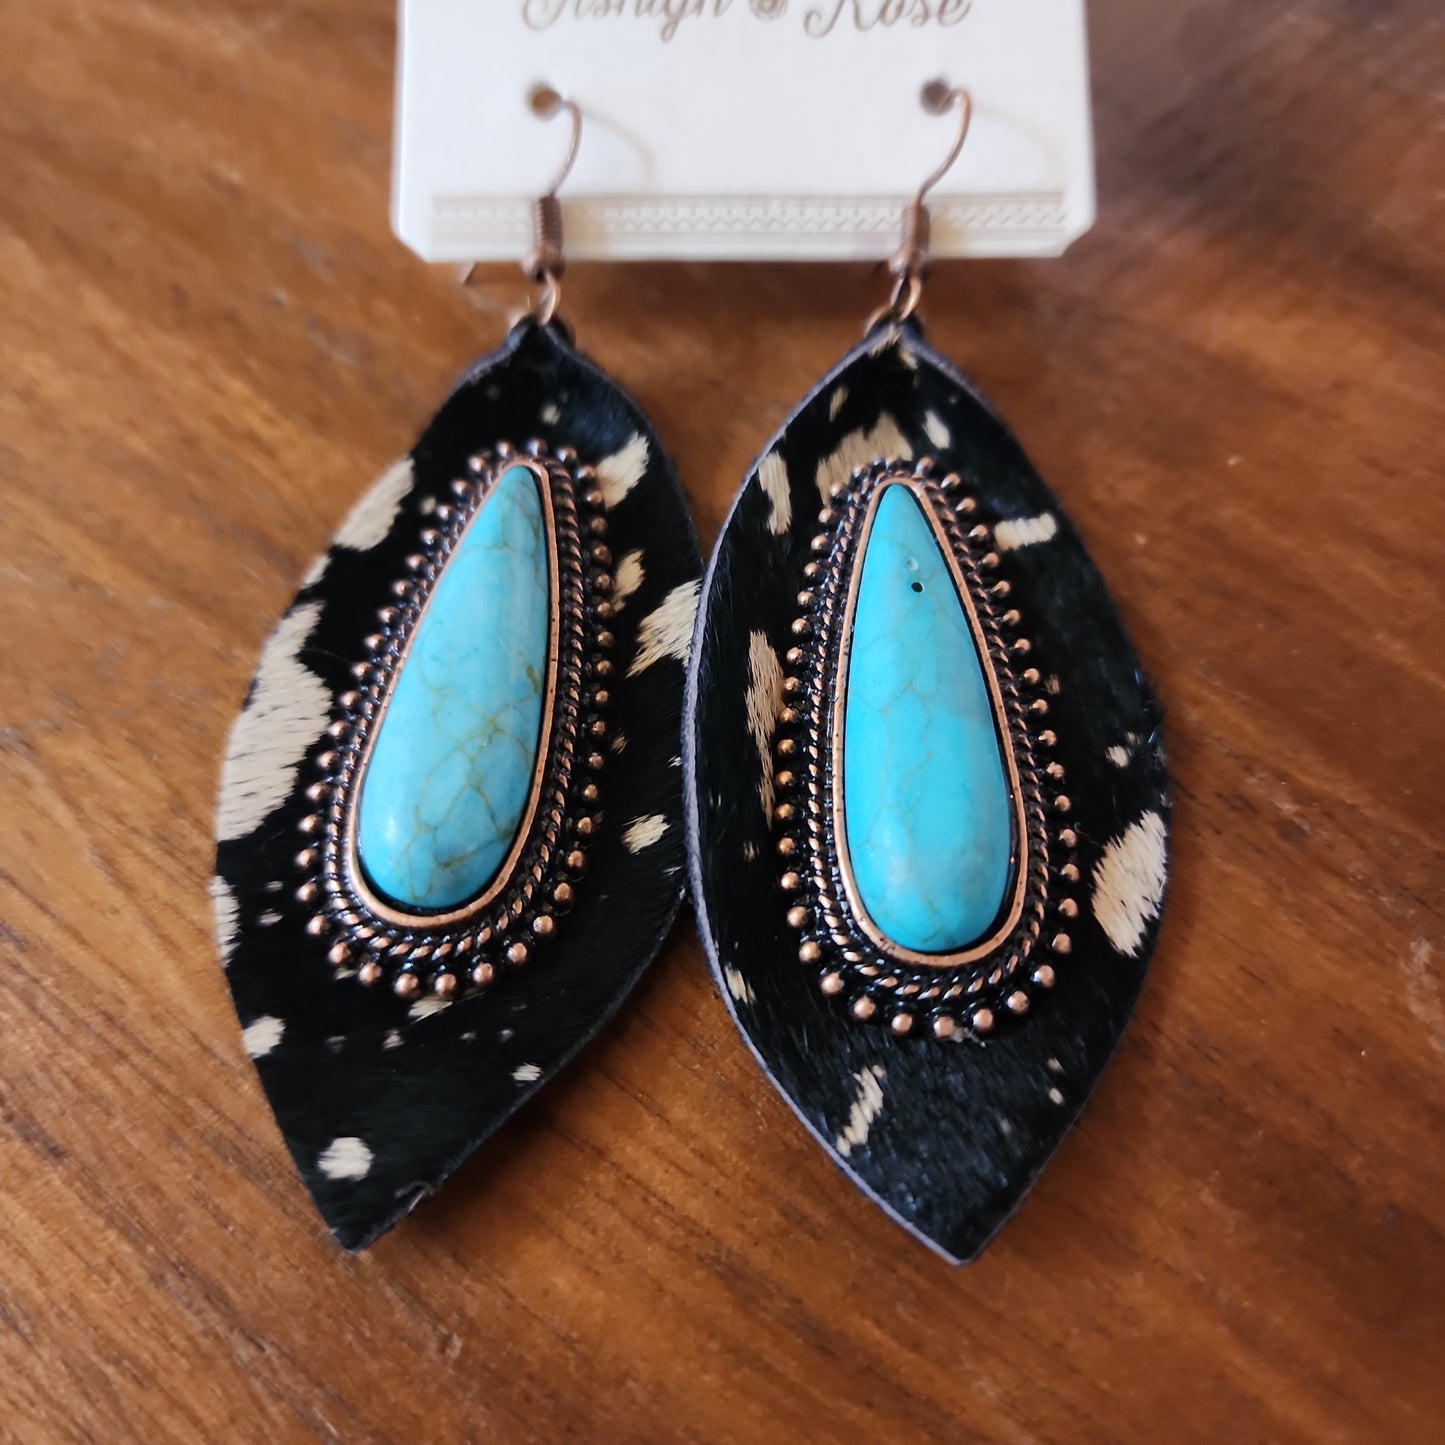 Say Howdy Rain Drop with Center Stone, Black Cowhide